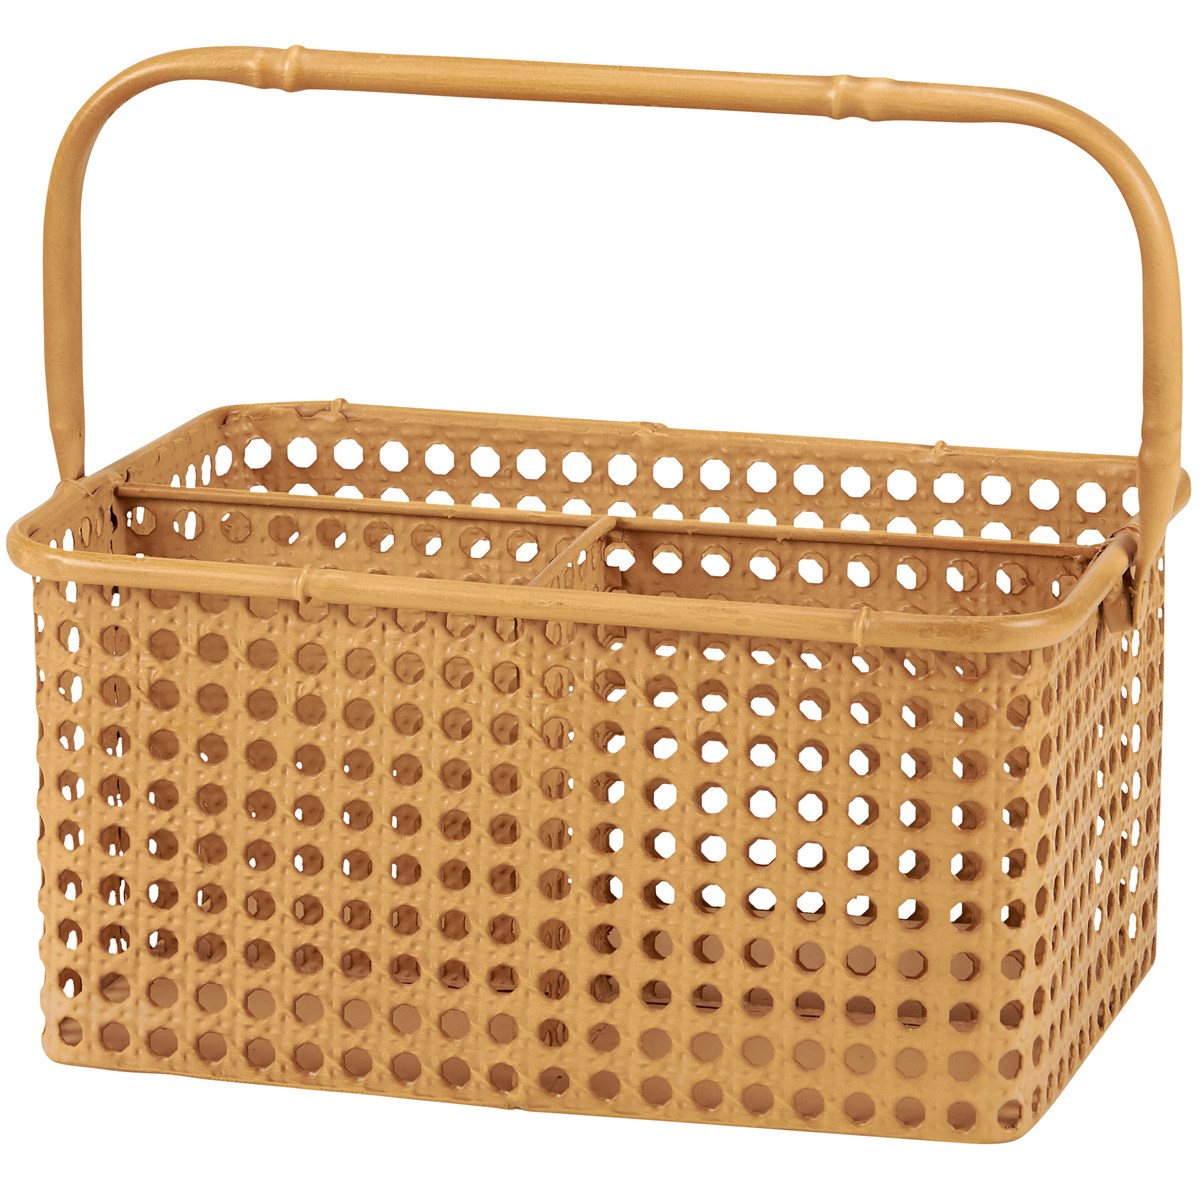 Cane Weave Caddy - Metal